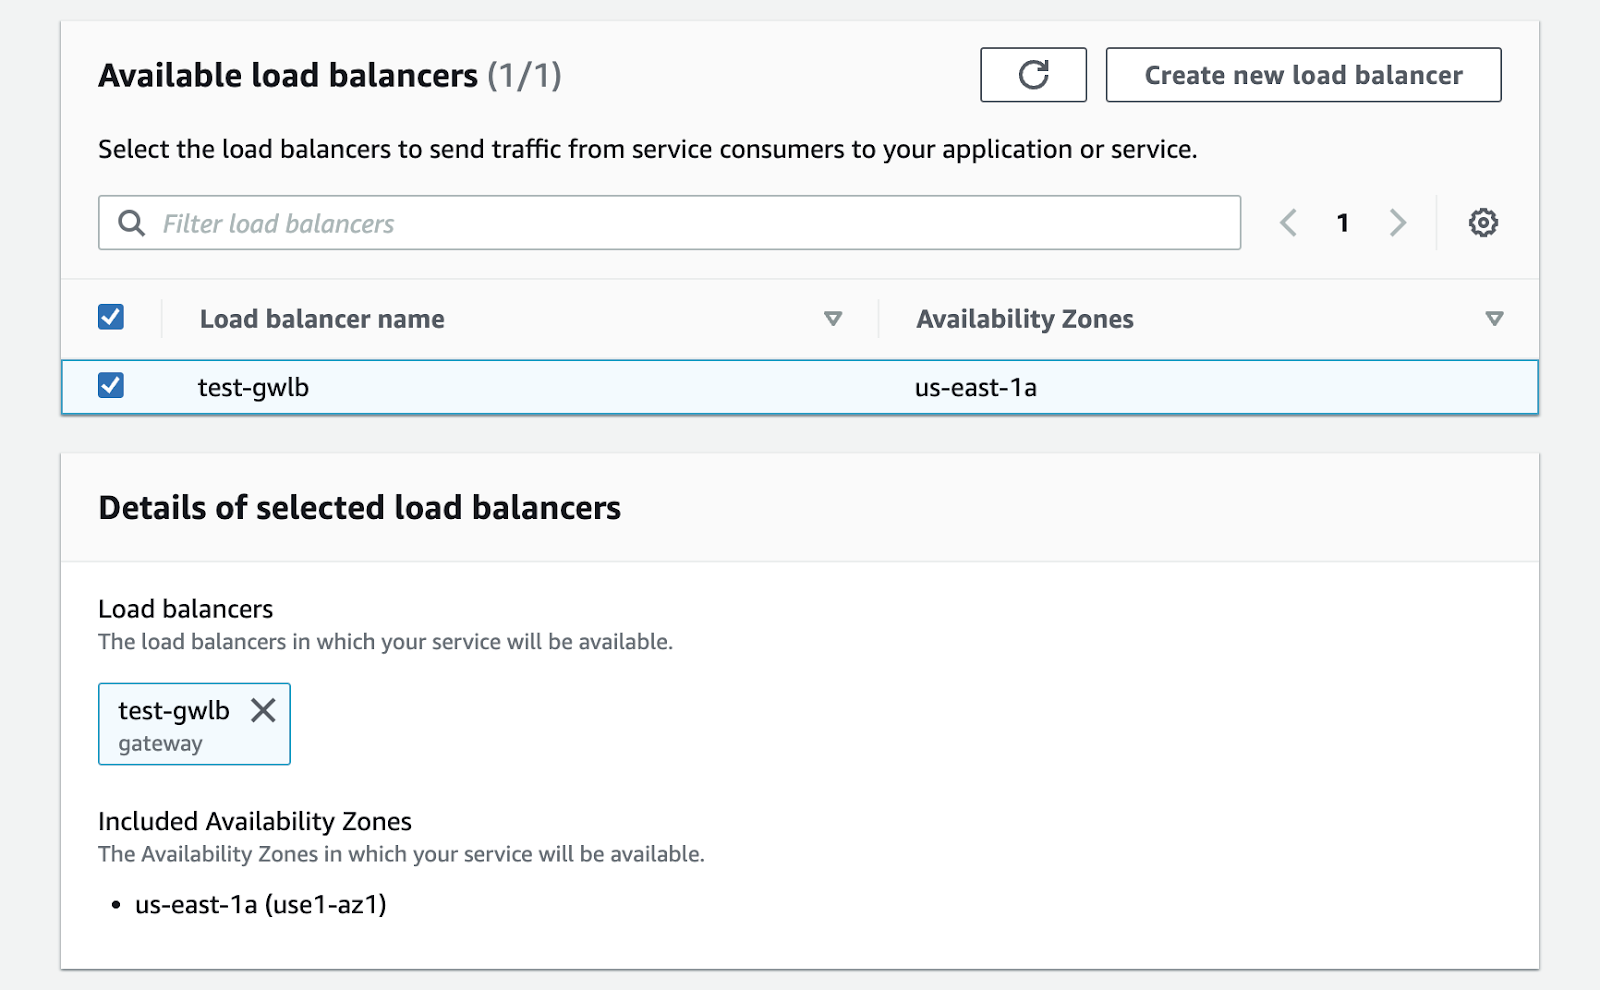 Available load balancers